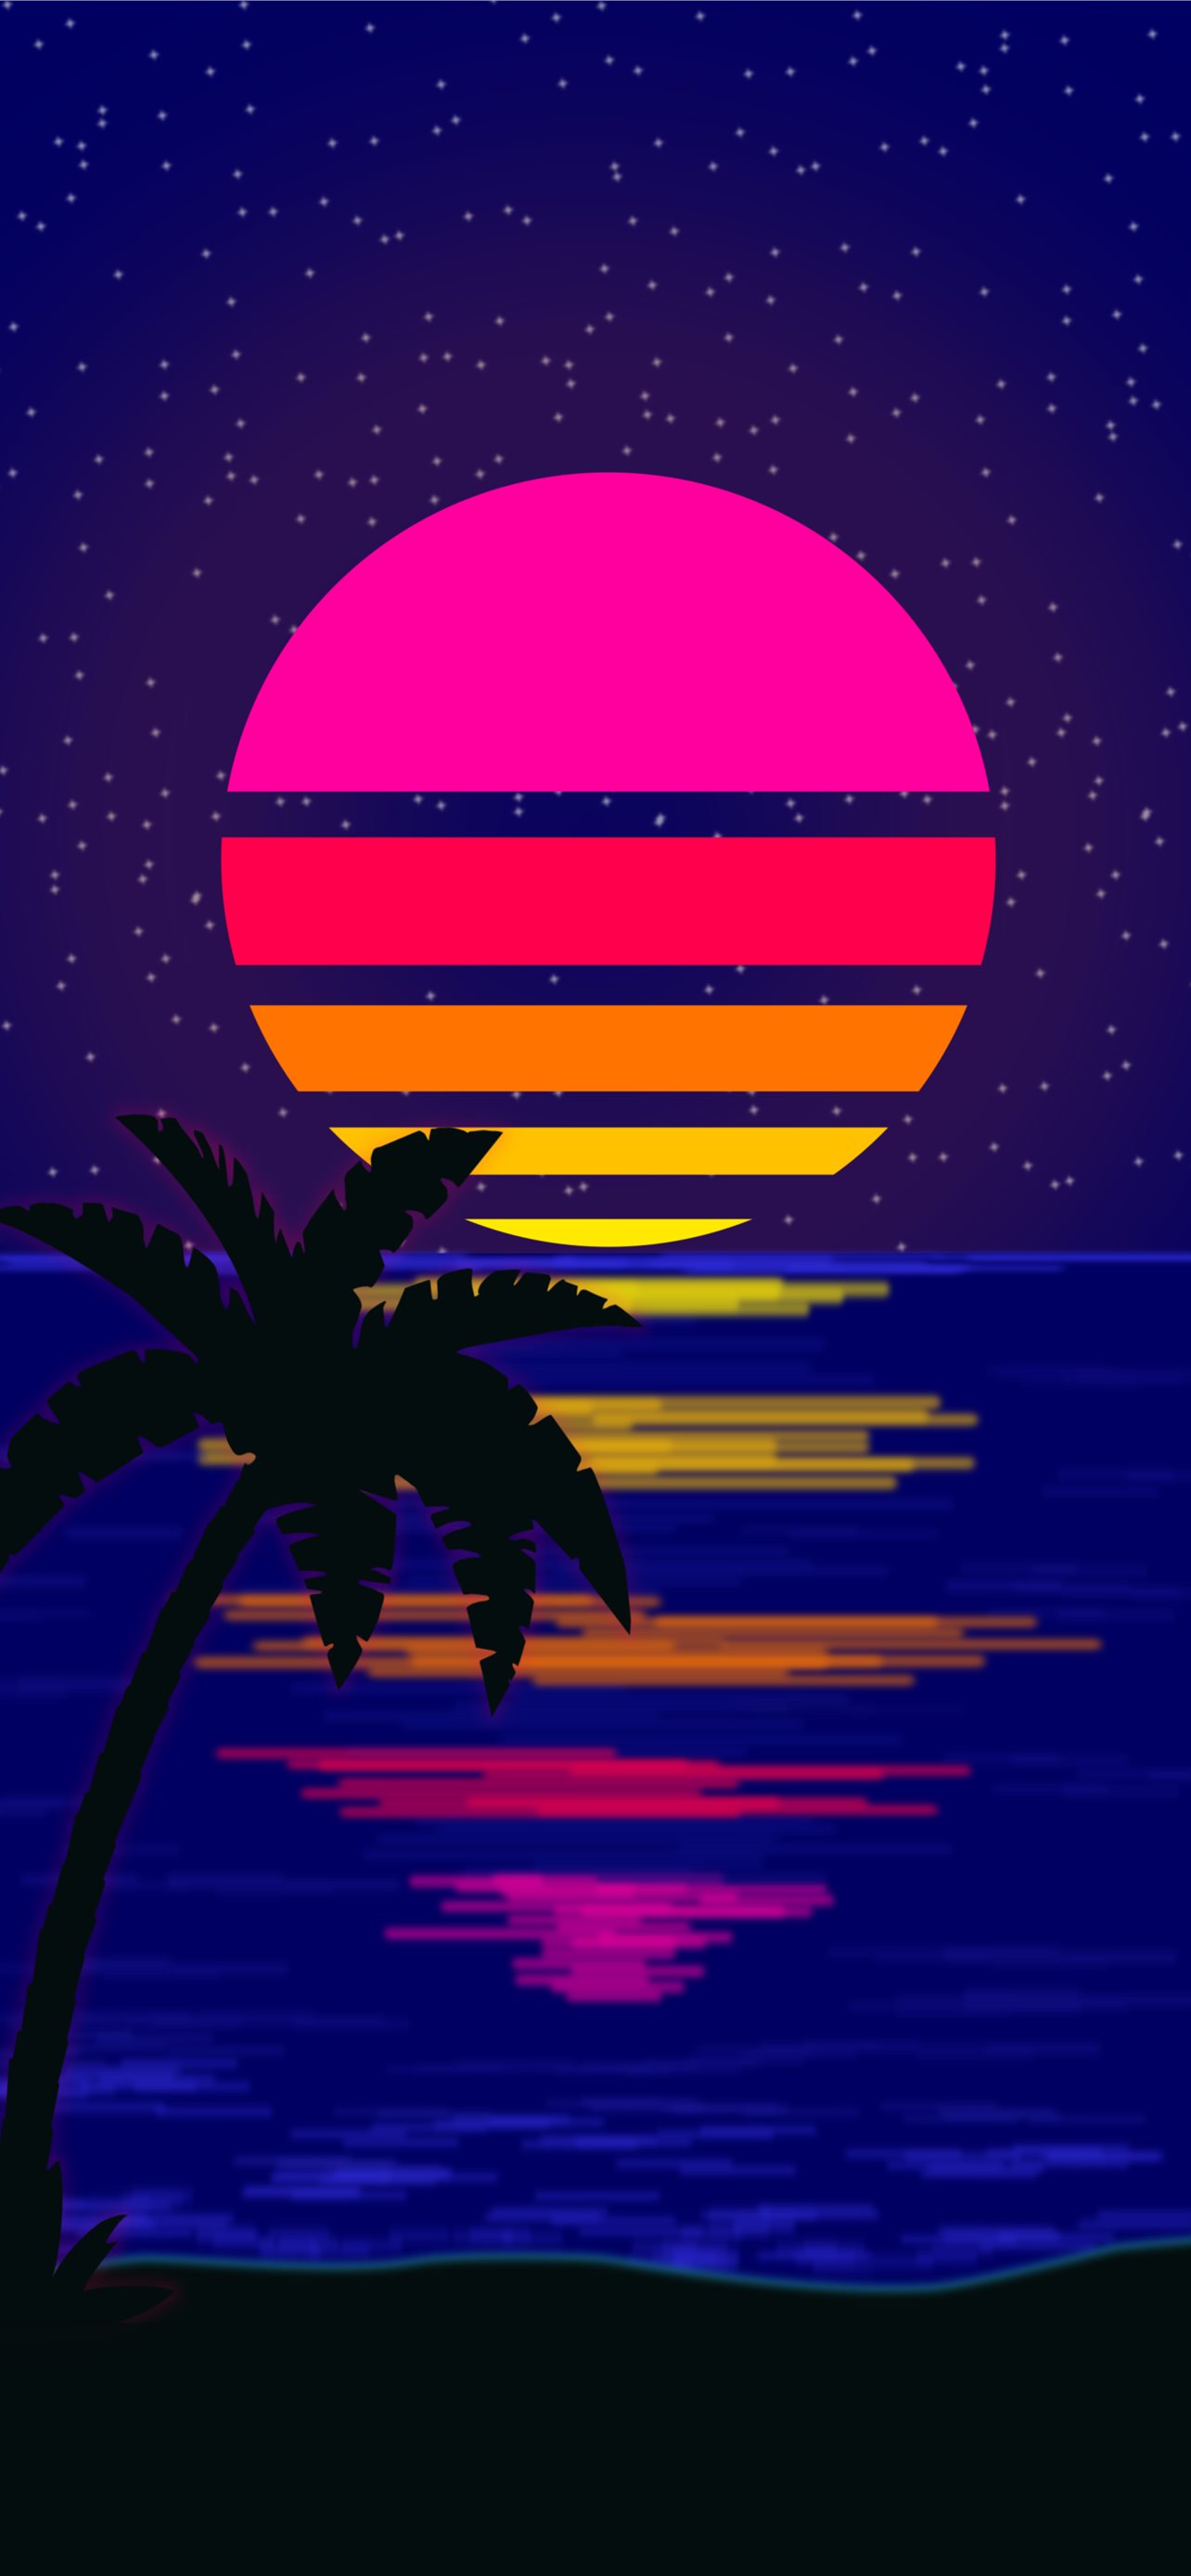 Synthwave Wallpapers  Top 35 Best Synthwave Backgrounds Download